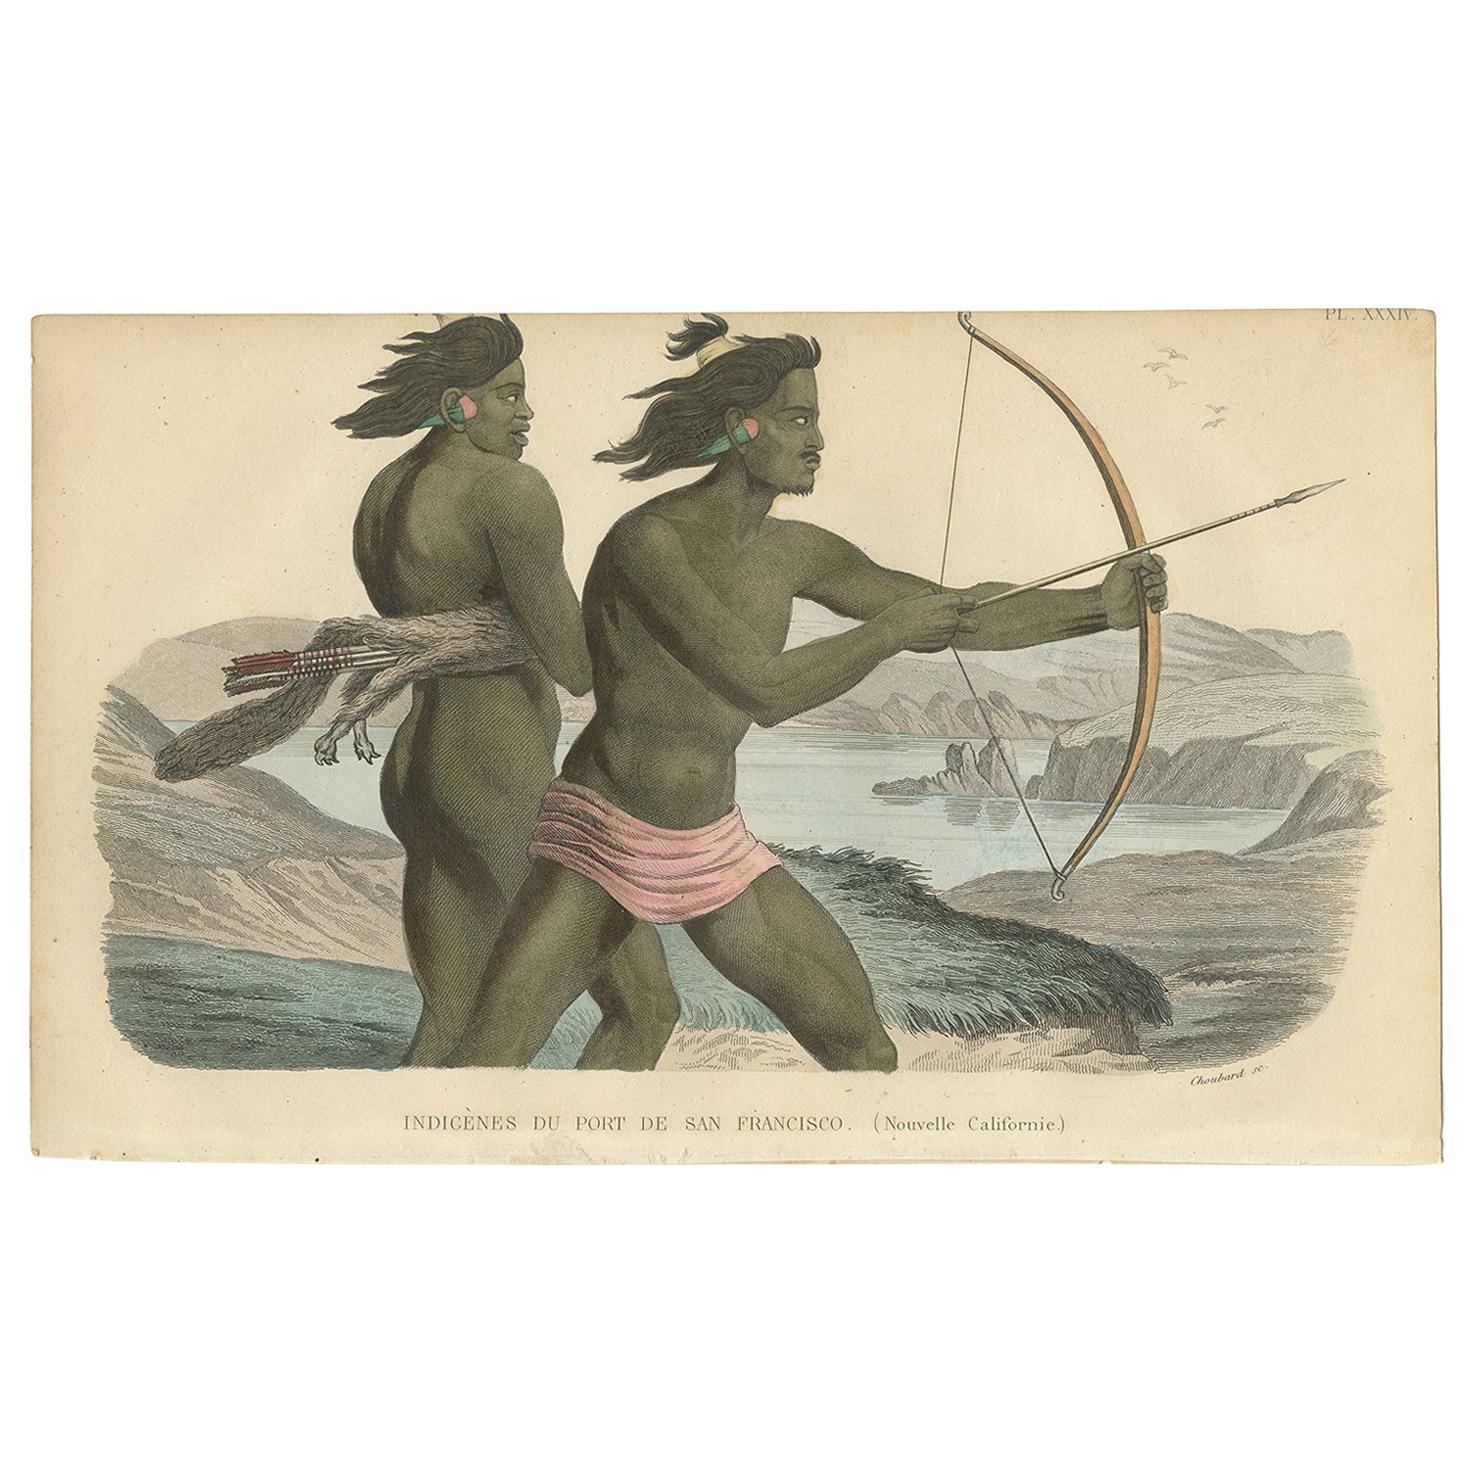 Antique Print of California Indians by Prichard '1843'